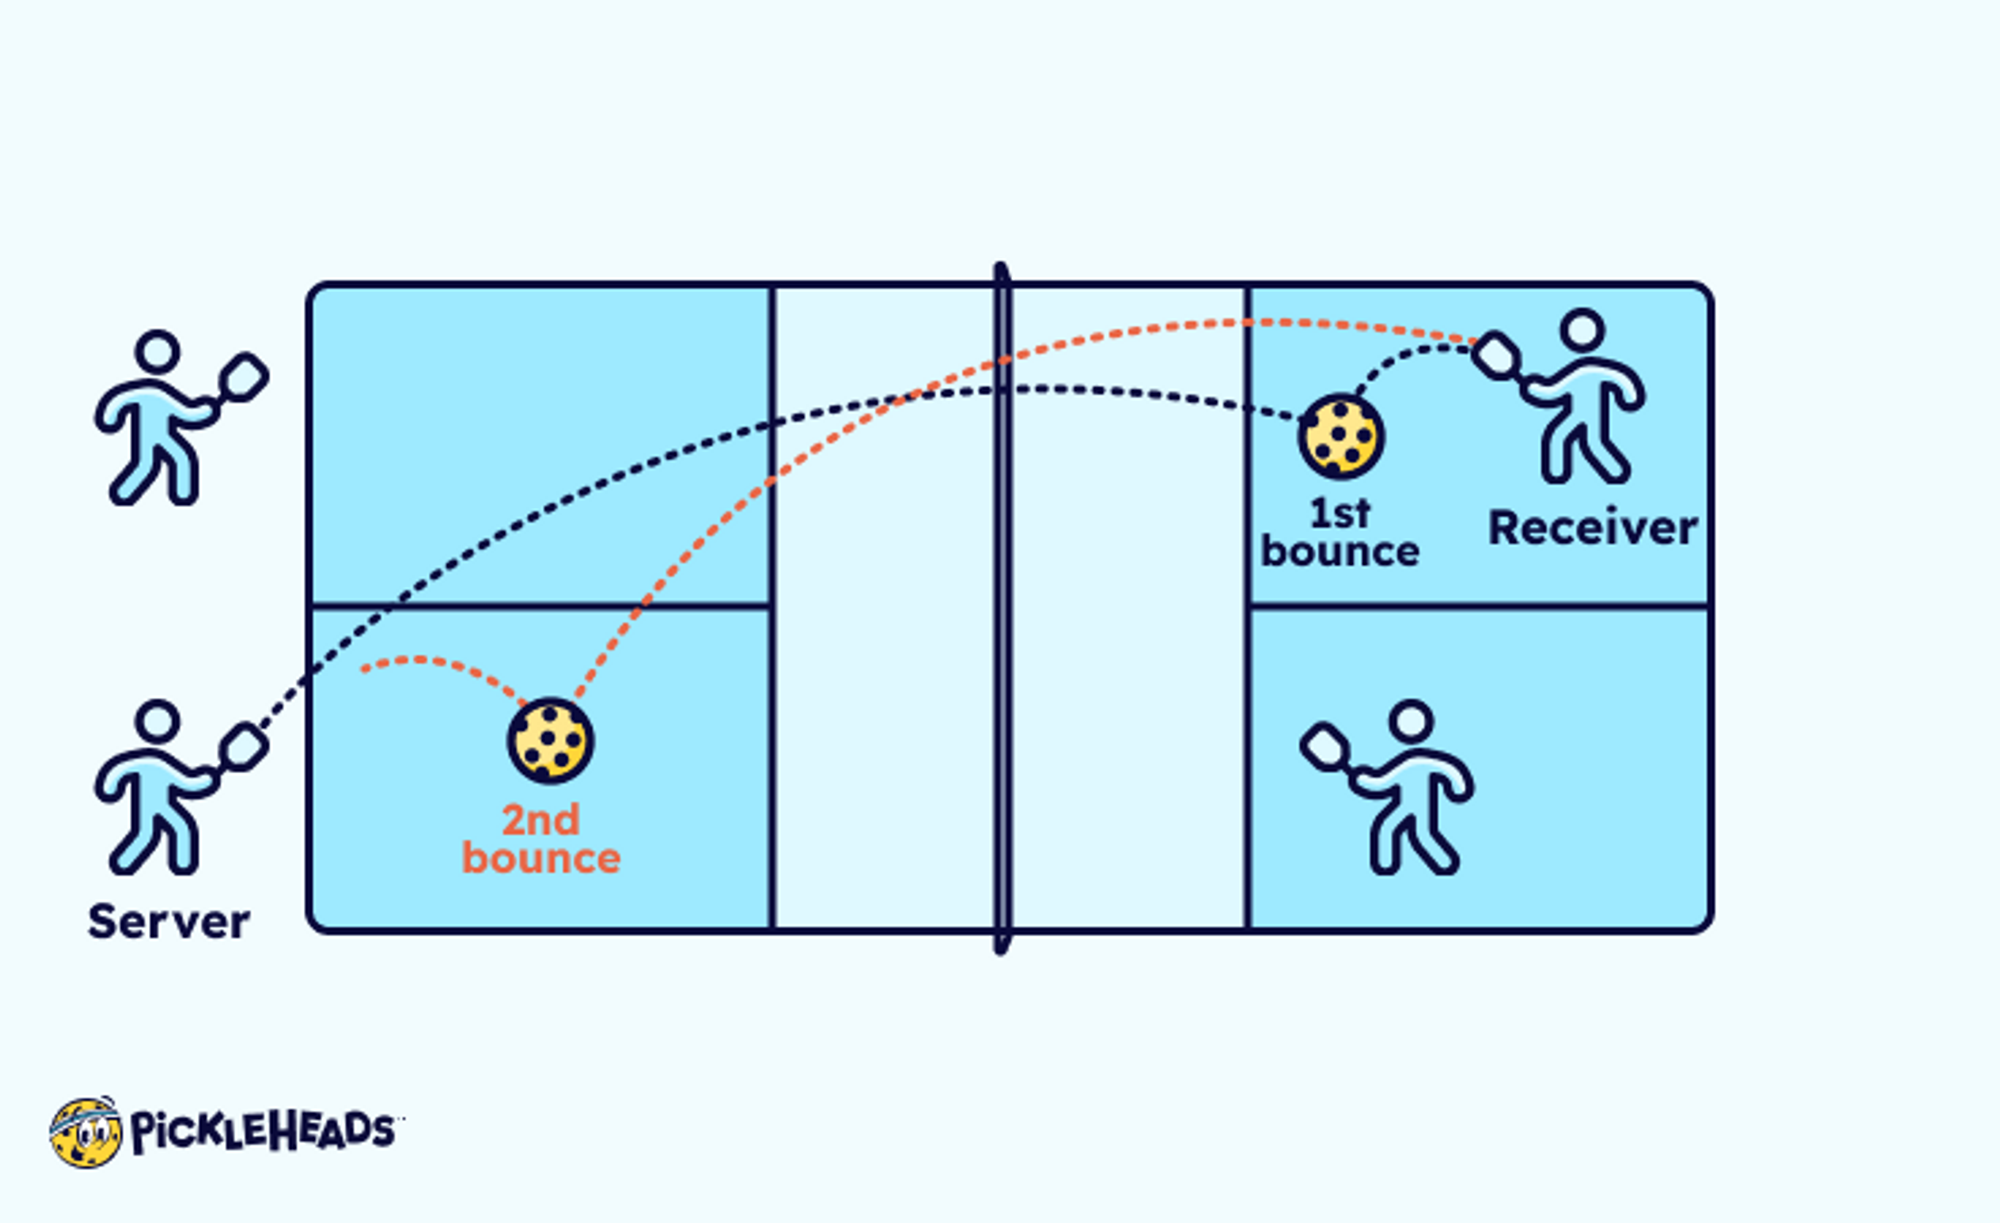 Illustration of double bounce rule in pickleball